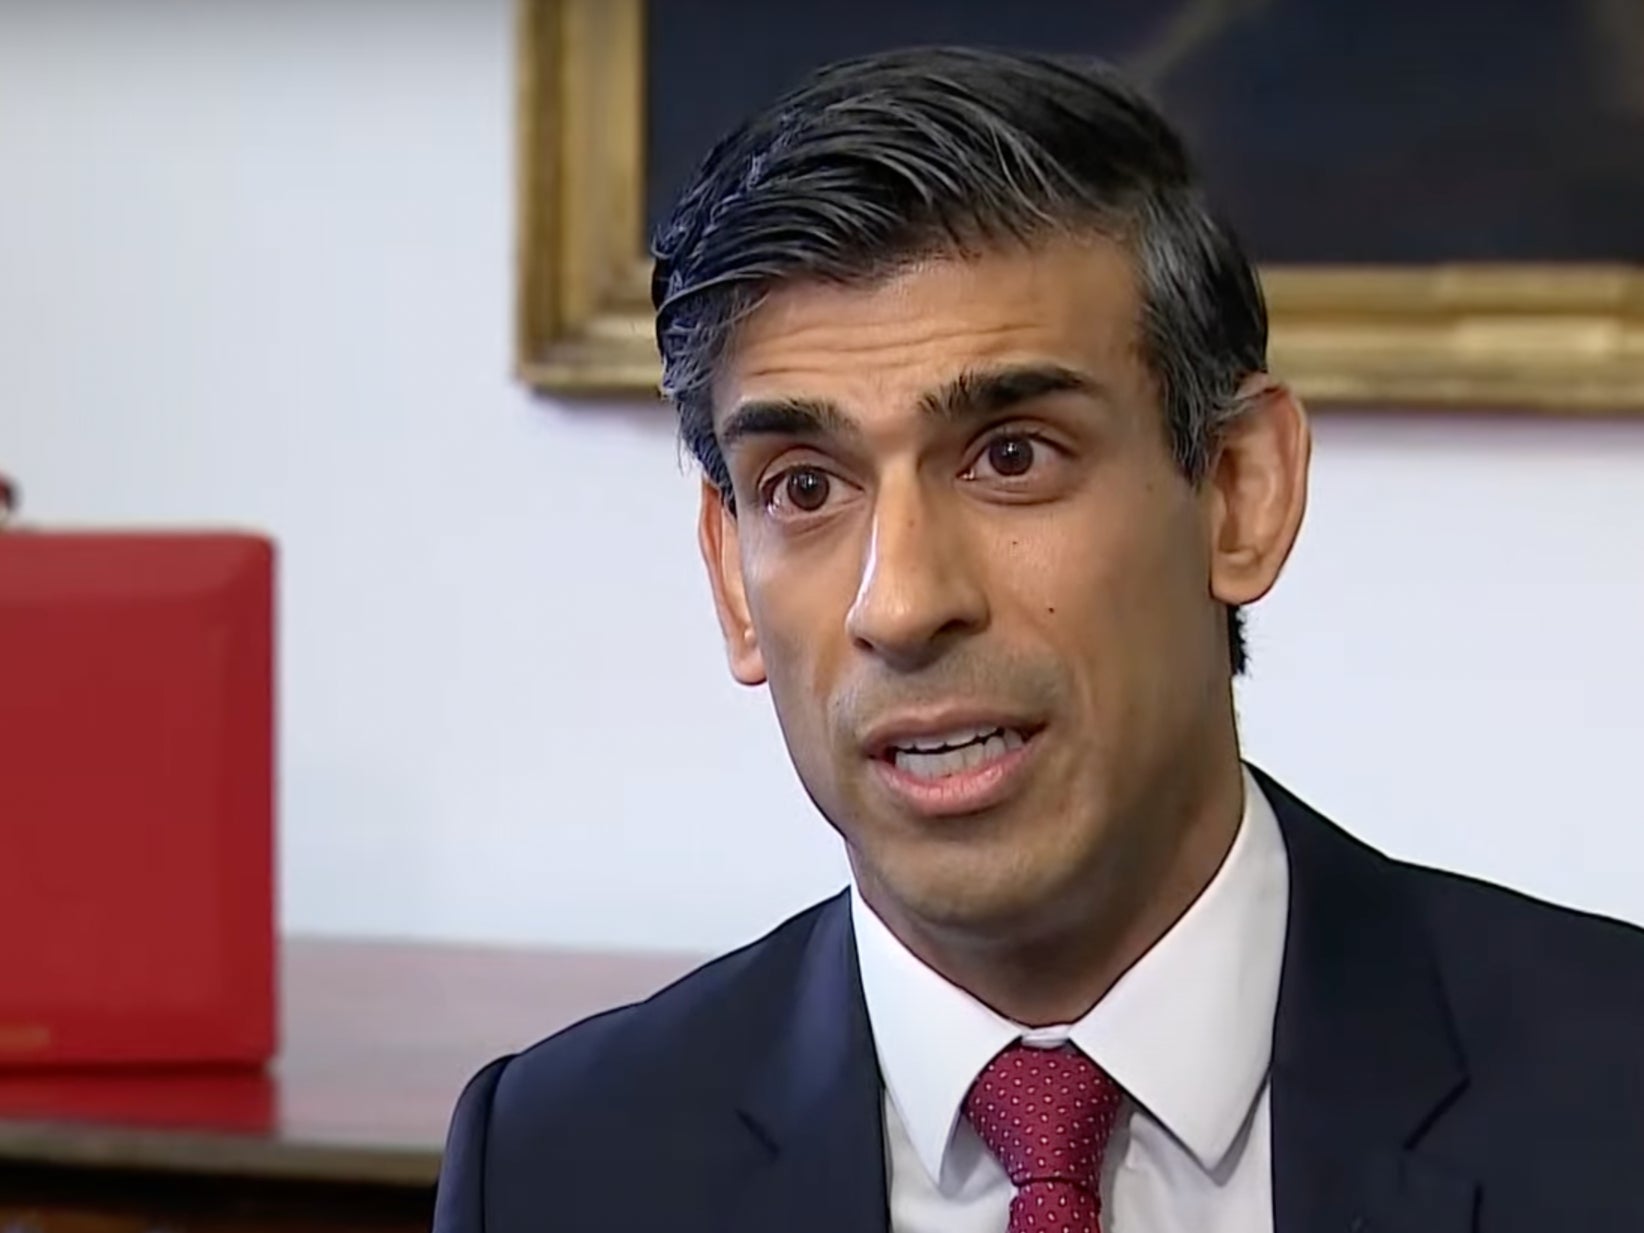 Chancellor Rishi Sunak acknowledged ‘challenges with inflation’ but said wage growth was ‘relatively healthy’ by historical standards